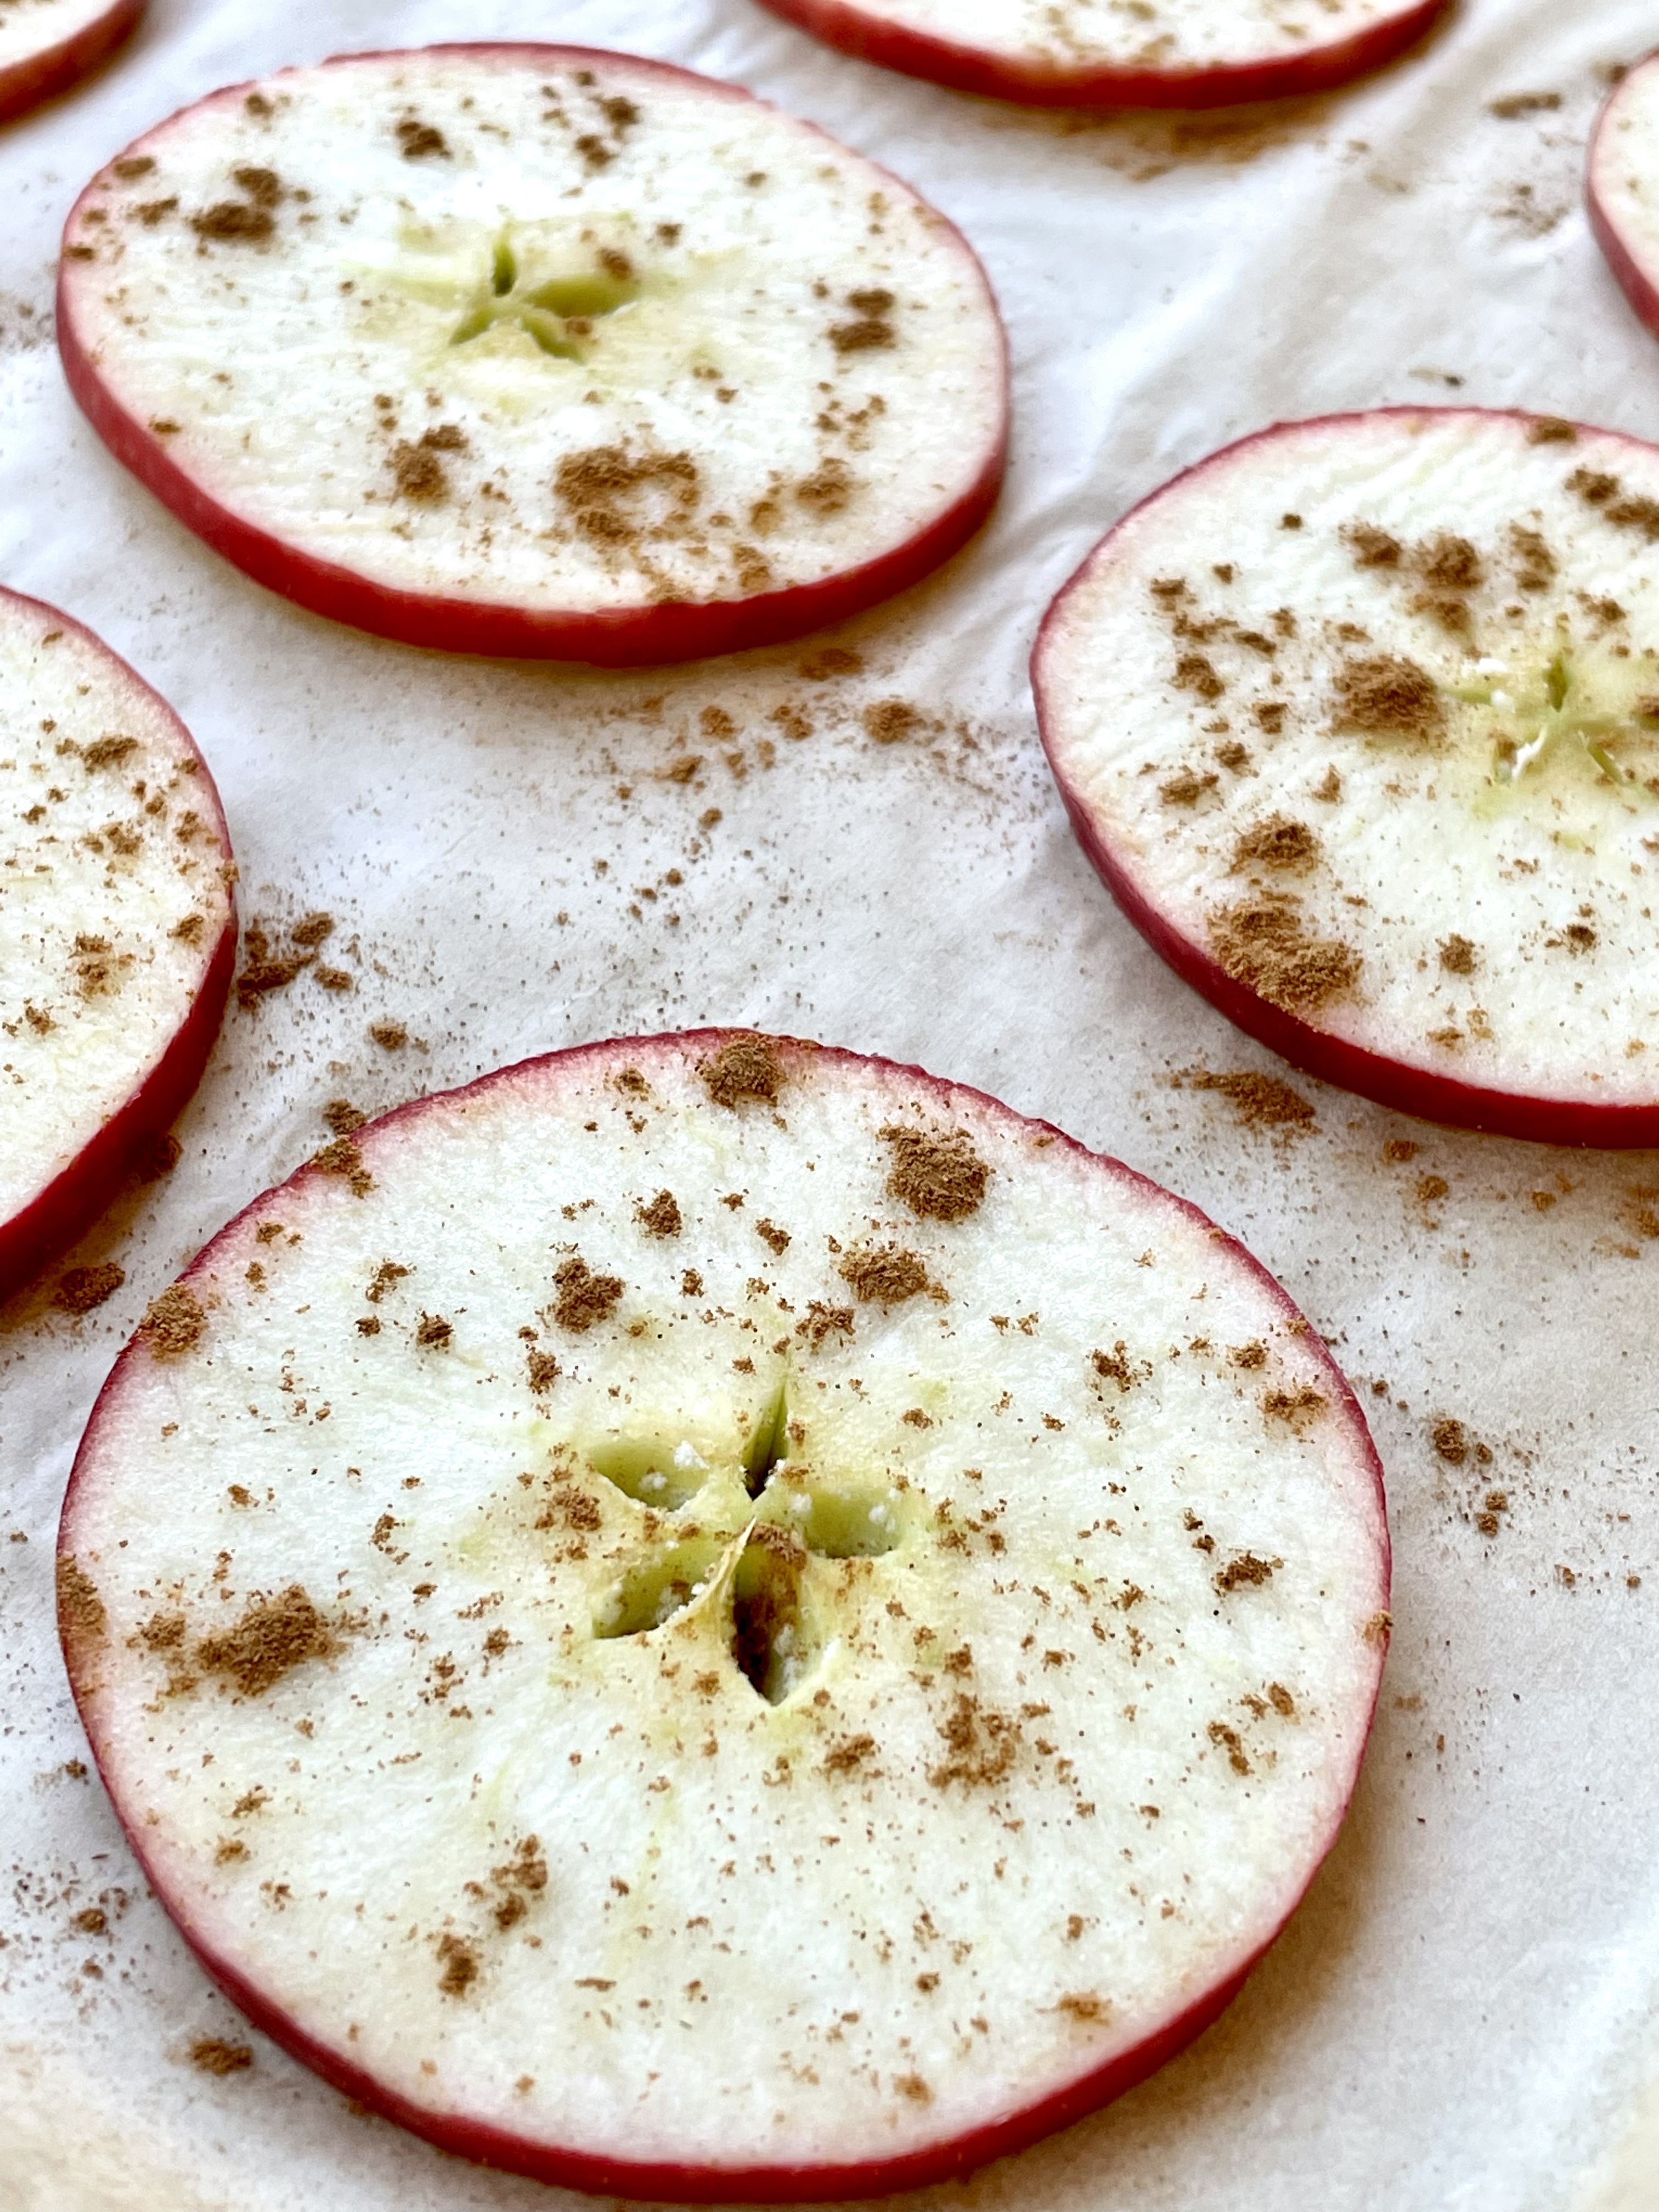 Apples topped with cinnamon